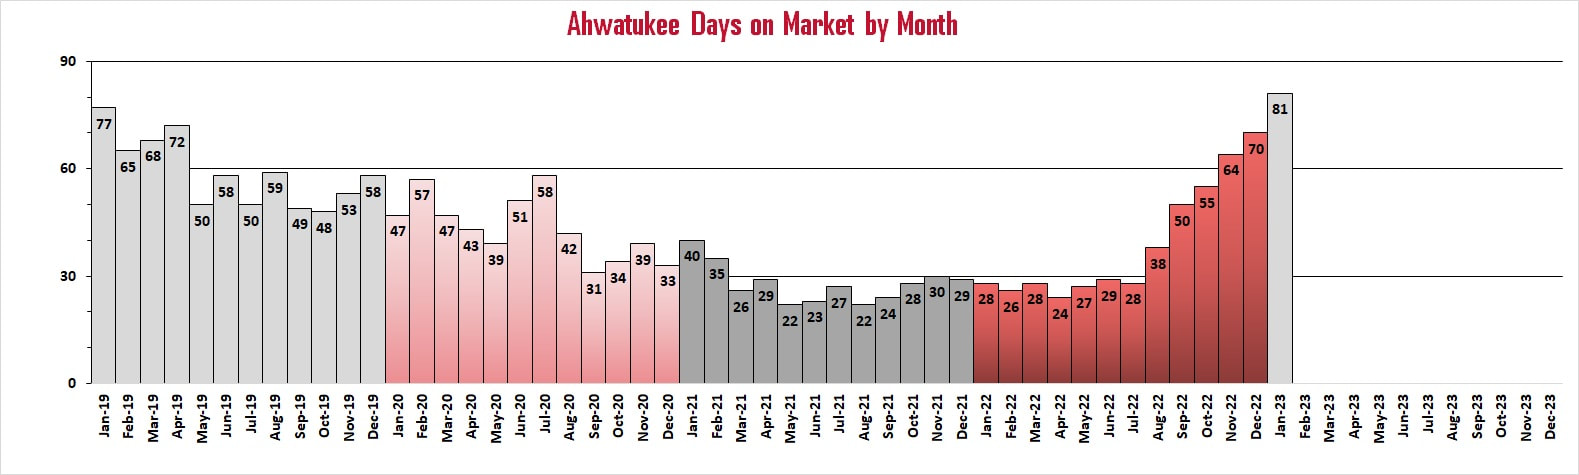 Ahwatukee Real Estate Market Reports | Ahwatukee Days on Market by Month | Troy Erickson Realtor